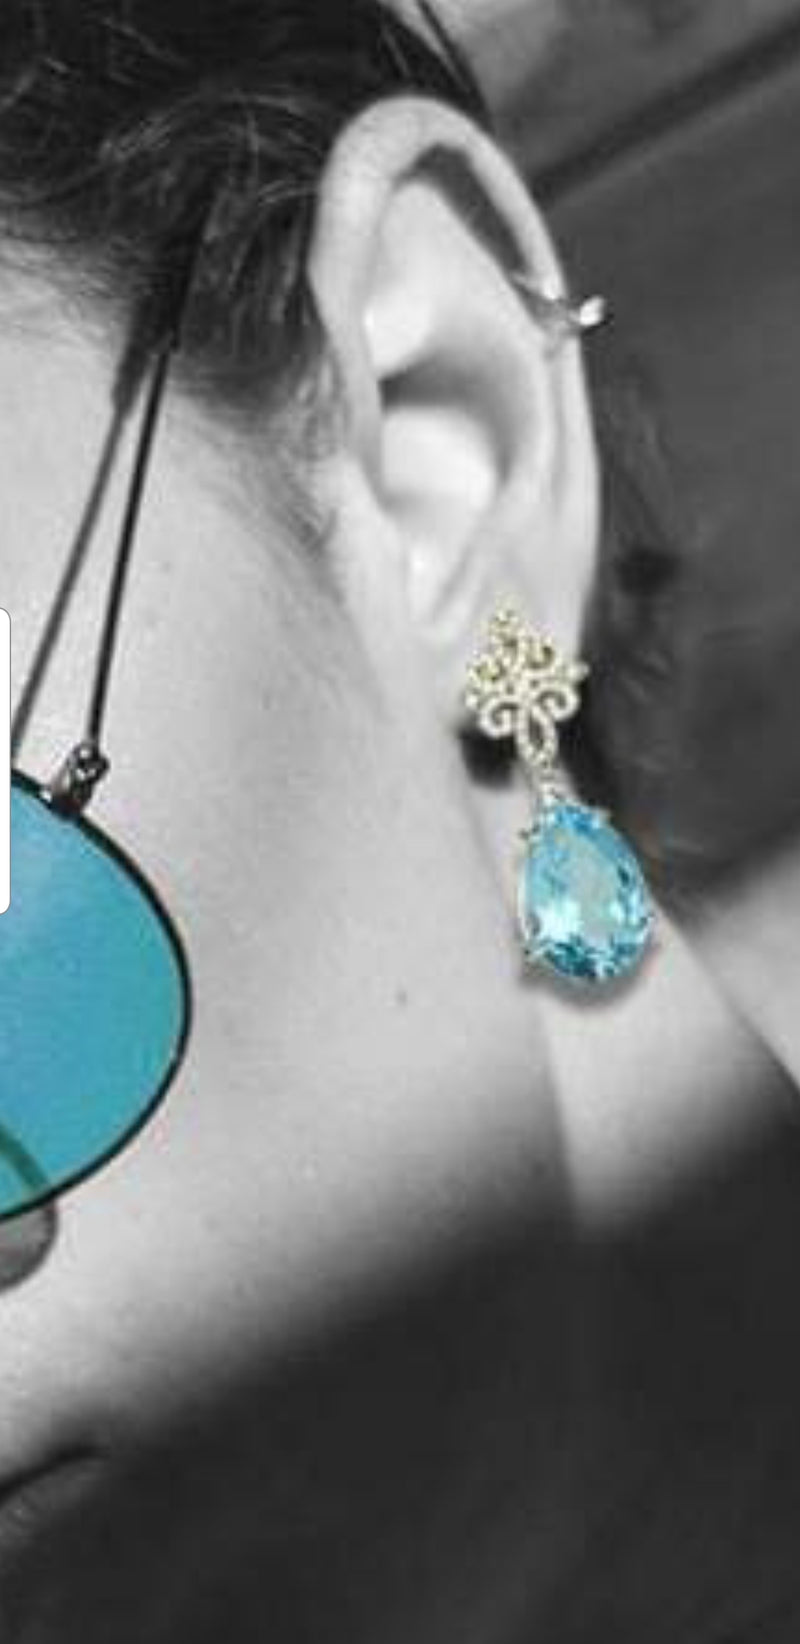 Elza | Decorative stud earrings with Blue Topaz drops